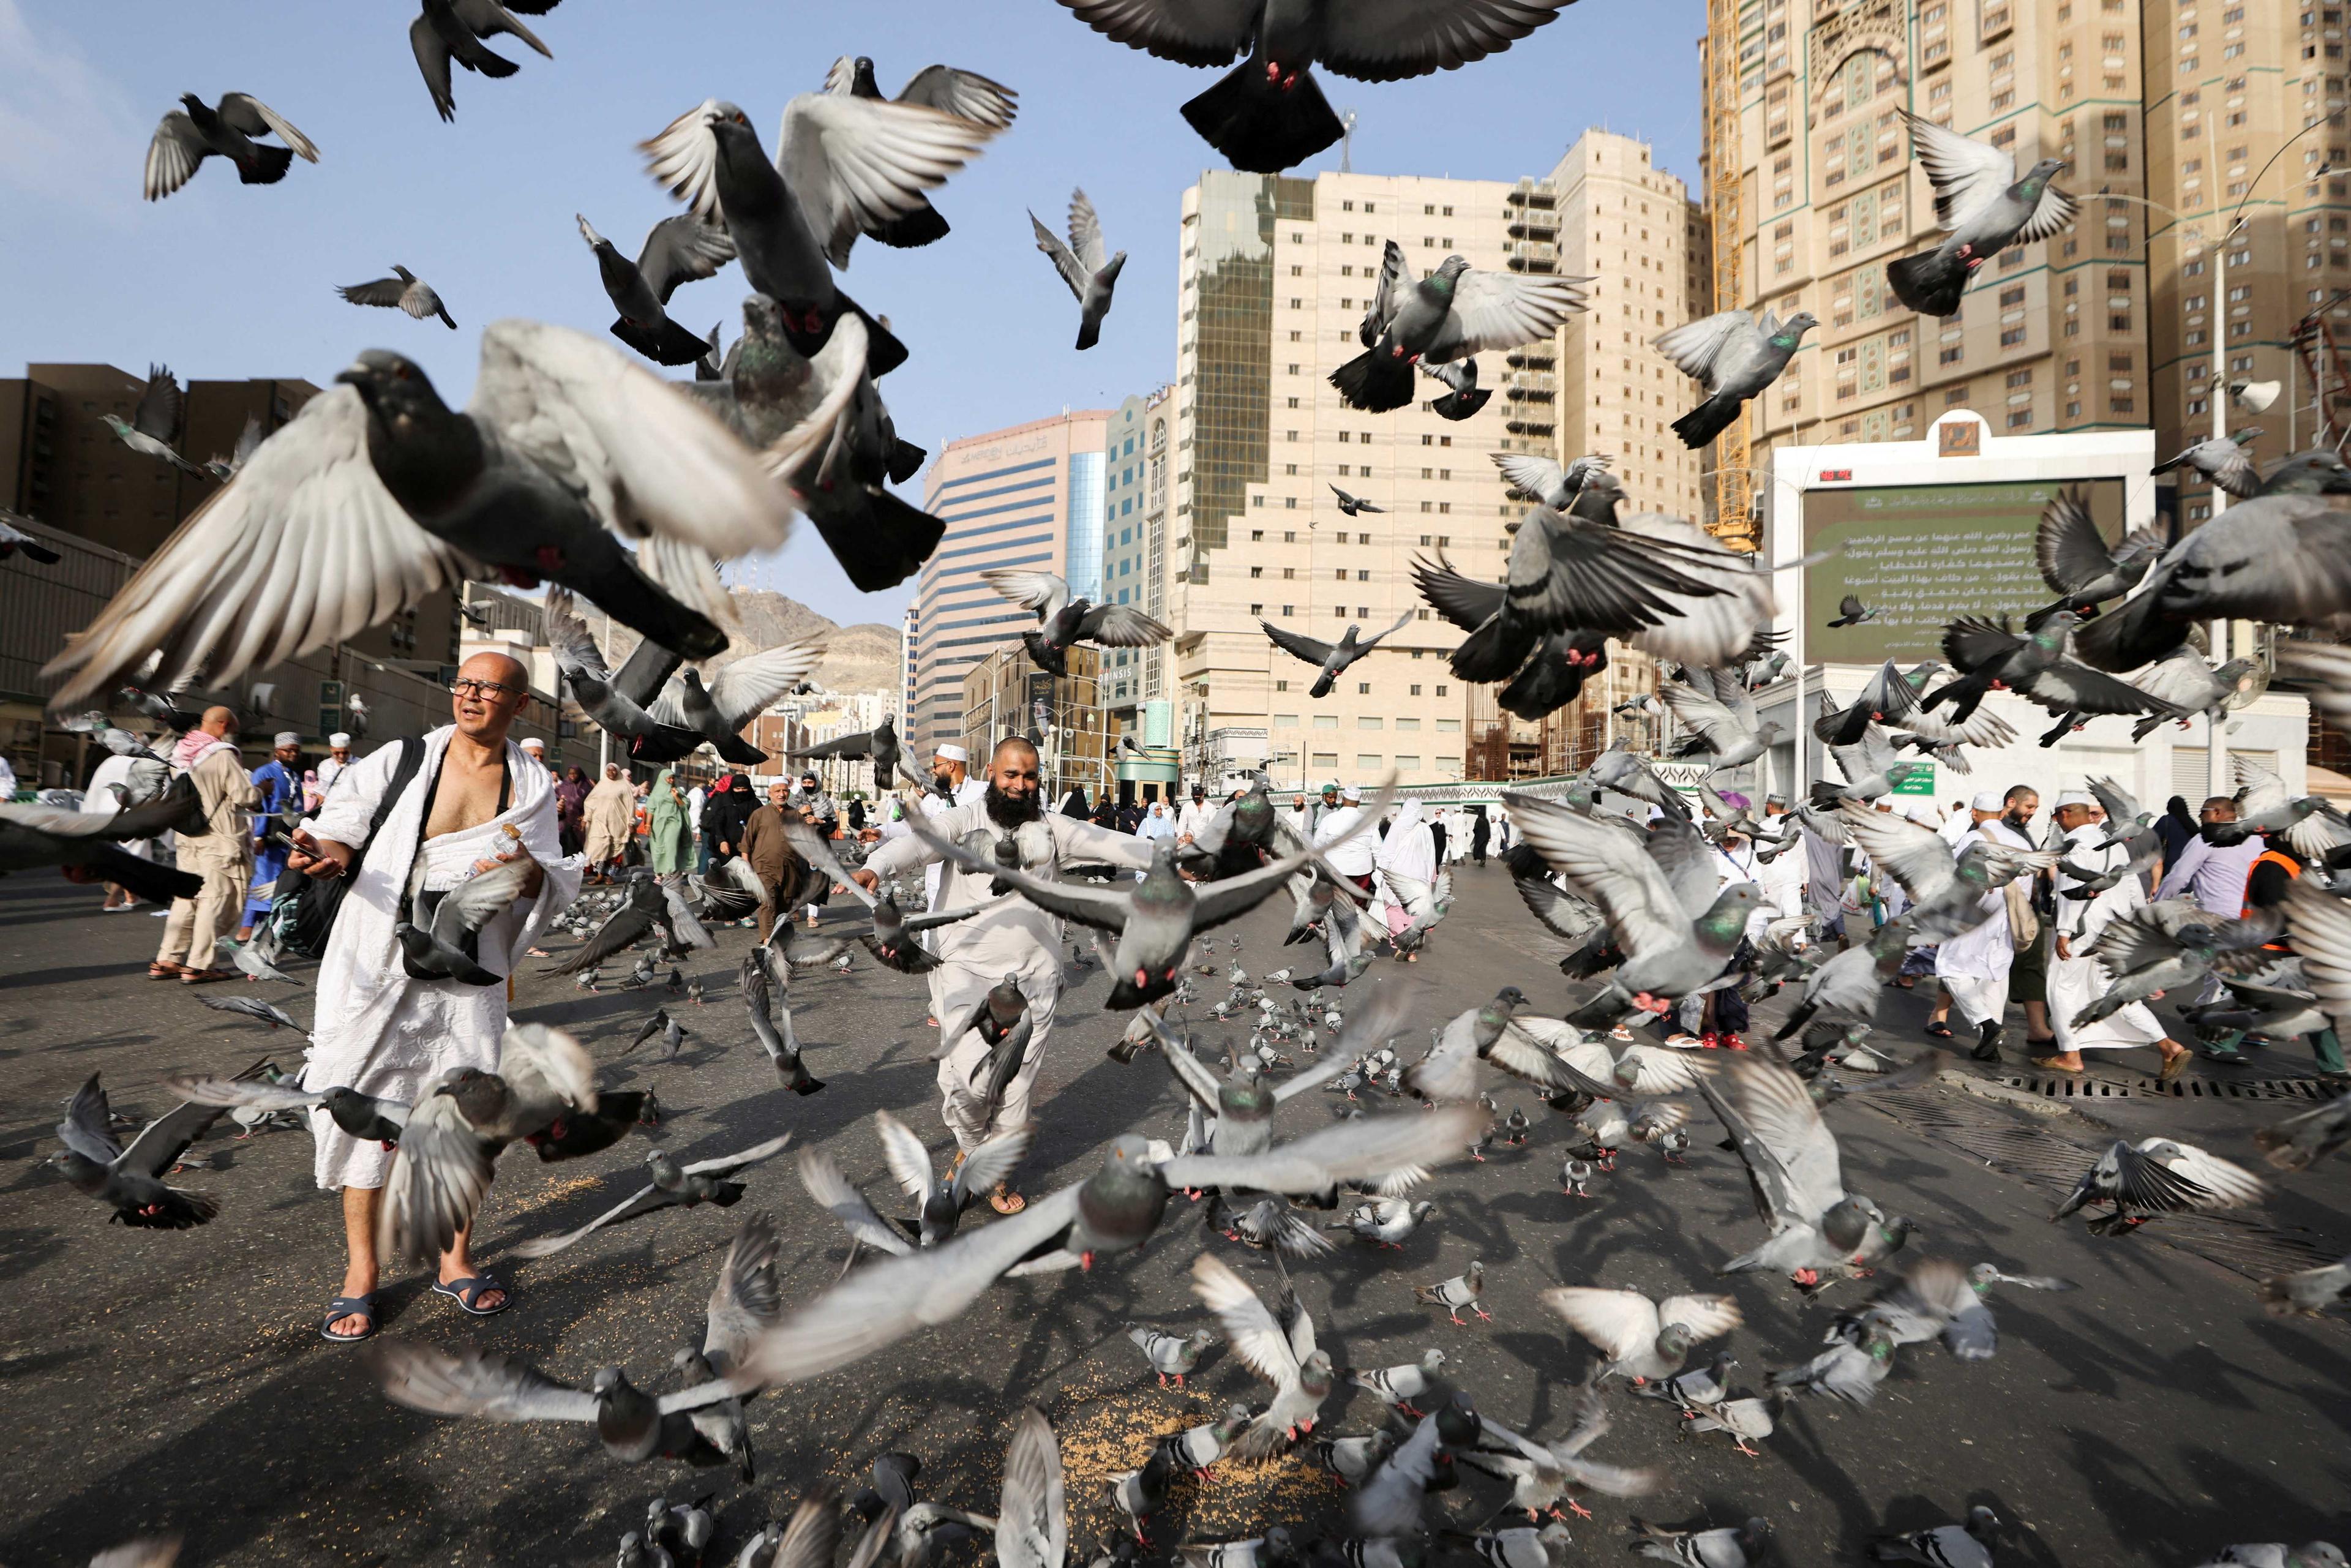 Doves fly around Muslim pilgrims outside the kaaba, as people start arriving to perform the annual haj in the Grand Mosque, in the holy city of Mecca, Saudi Arabia, June 24. Photo: Reuters